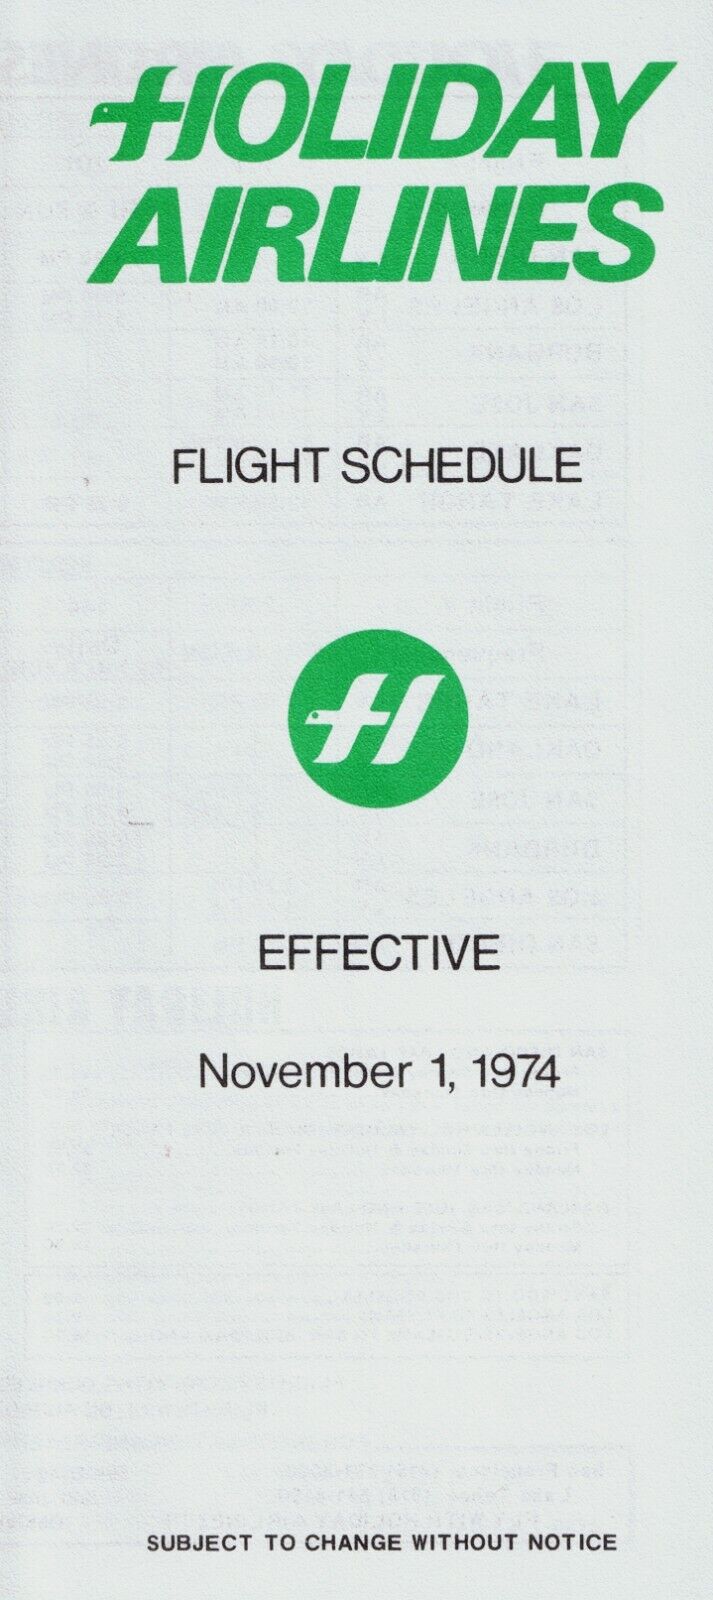 Holiday Airlines Timetable  November 1, 1974 =